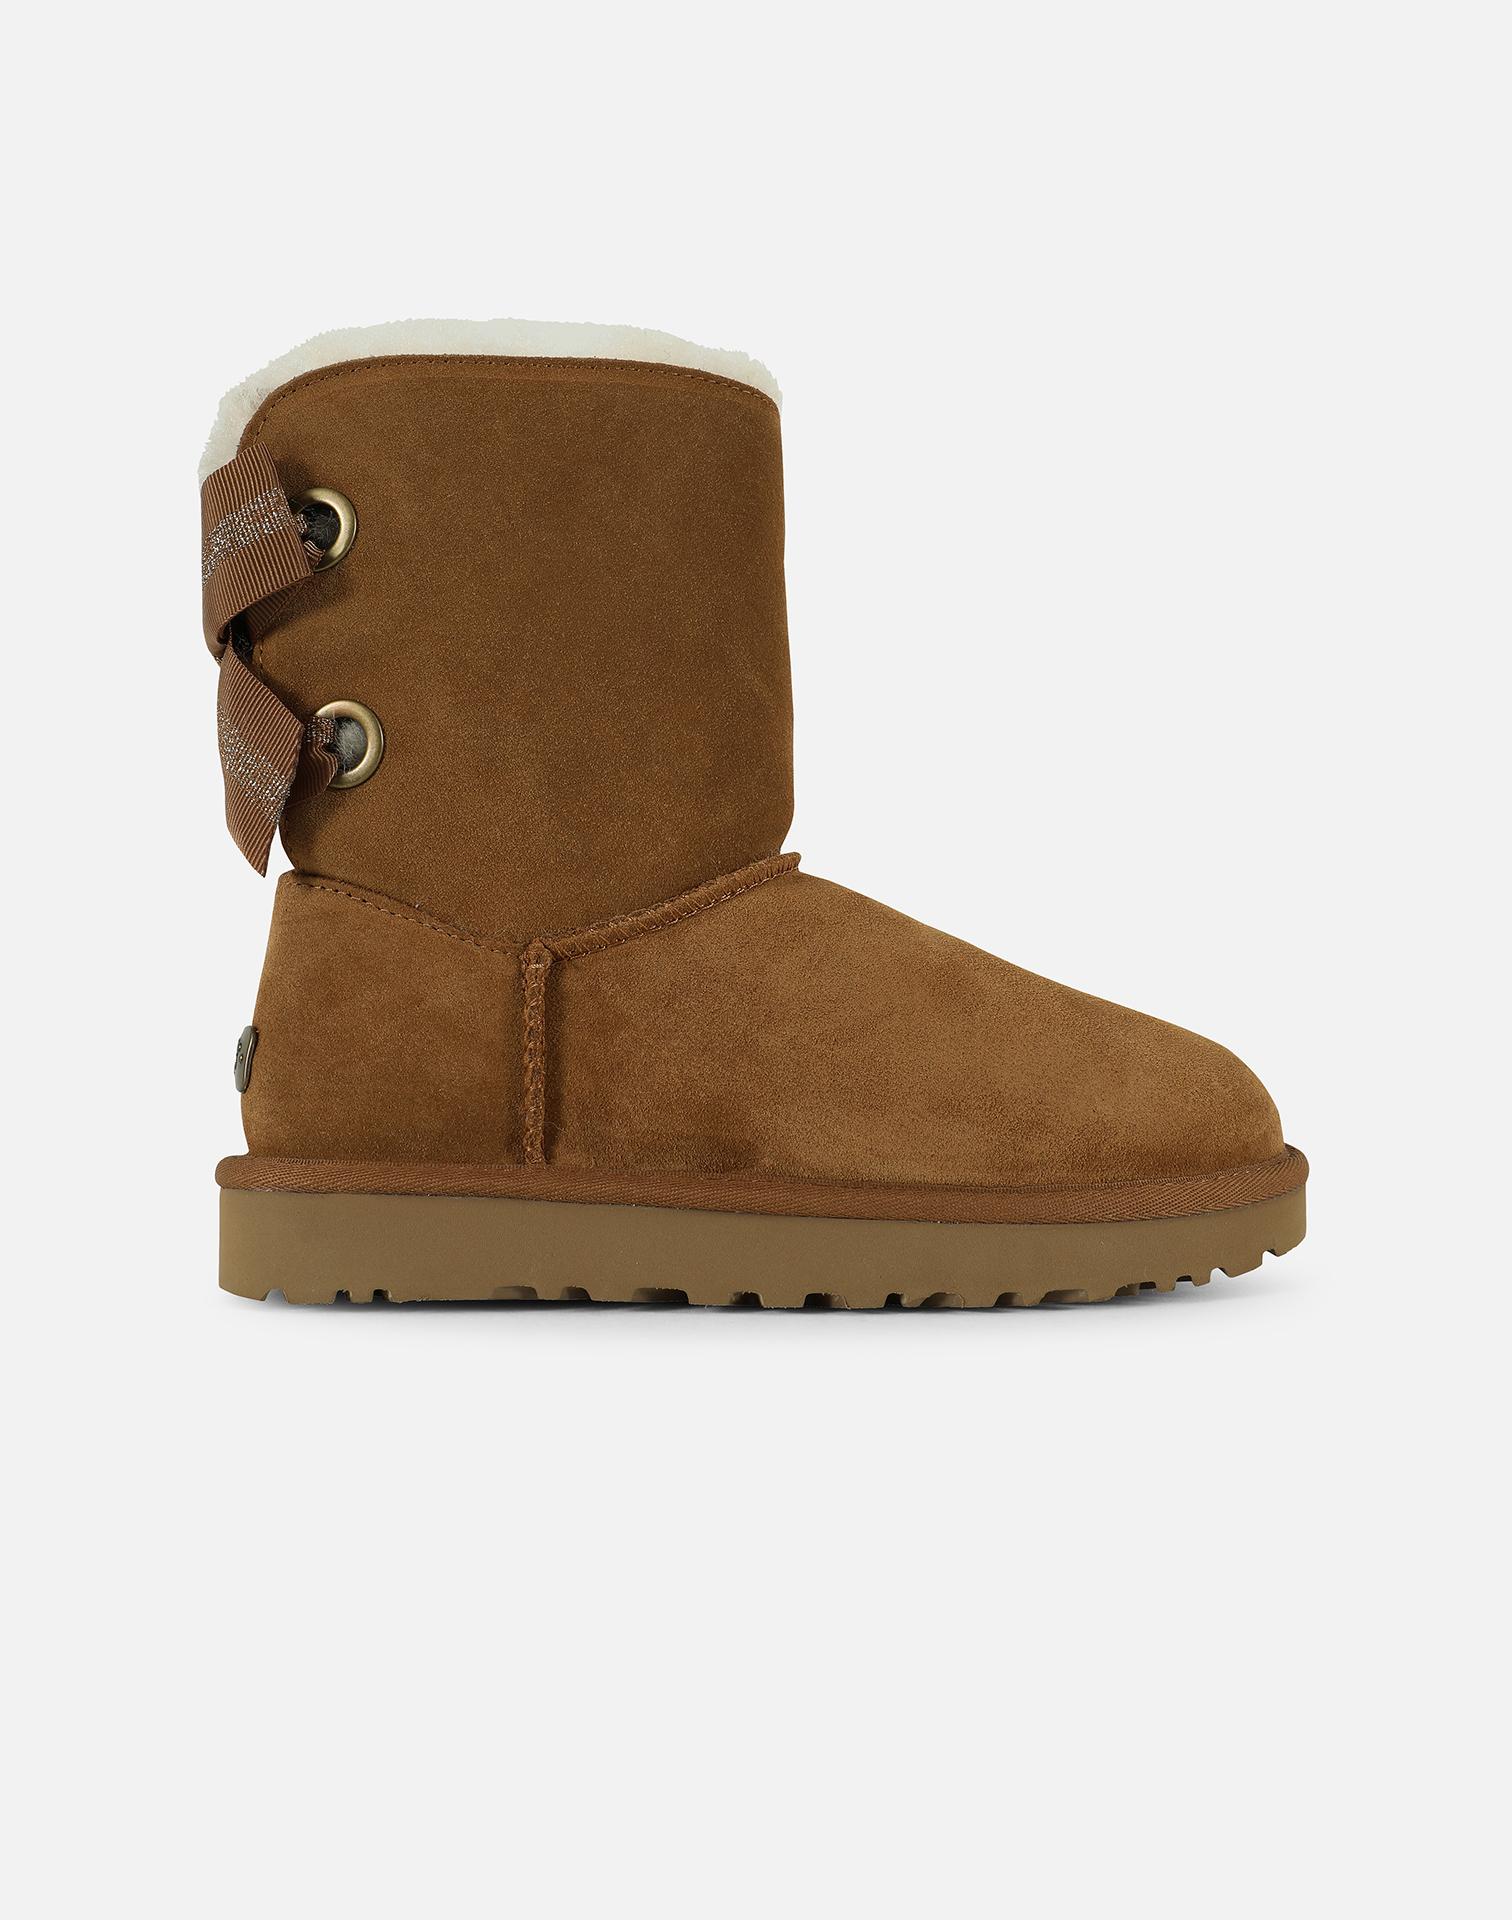 UGG Suede Customizable Bailey Bow Short Boots in Tan ...